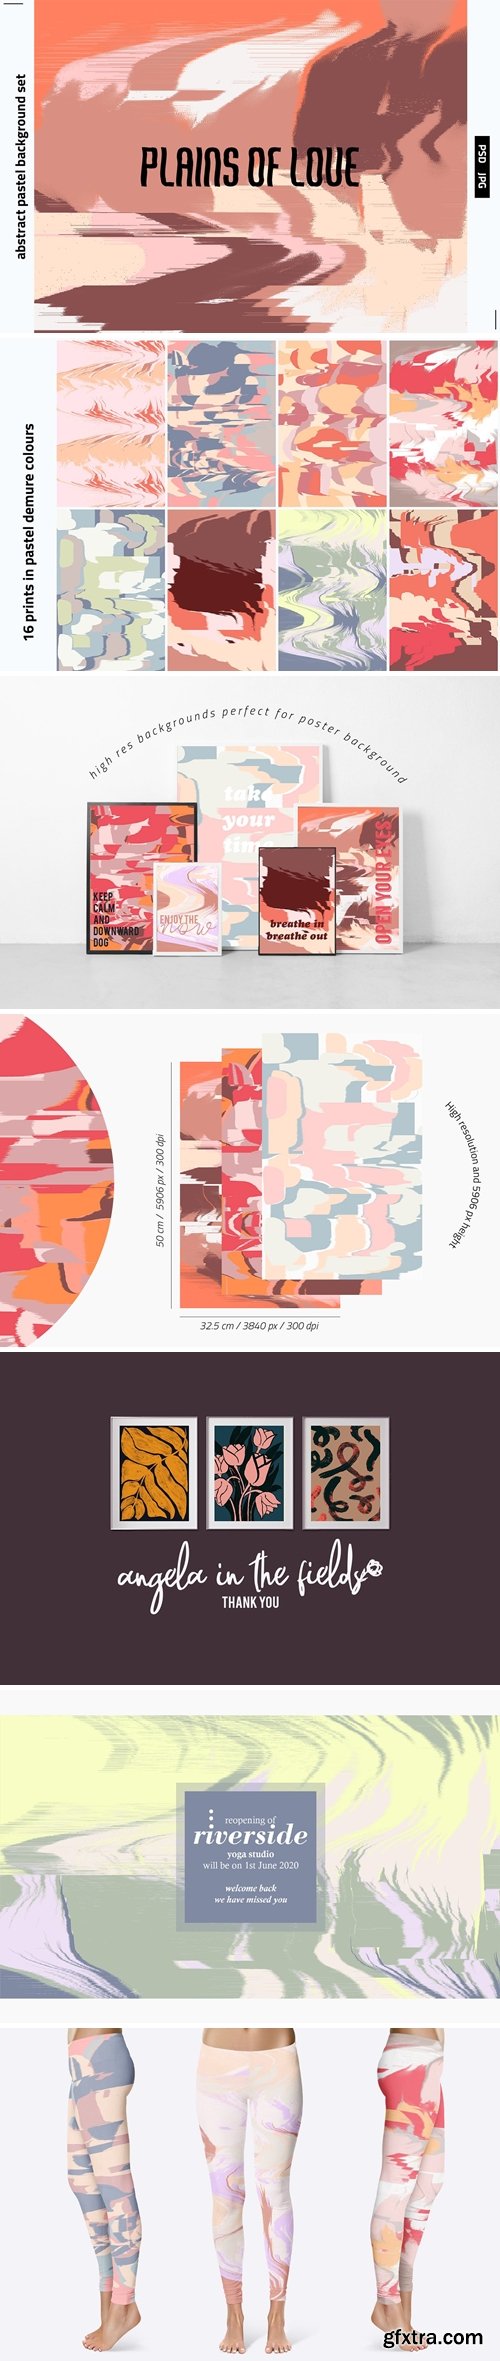 CreativeMarket - Plains Of Love Abstract Backgrounds 4909499